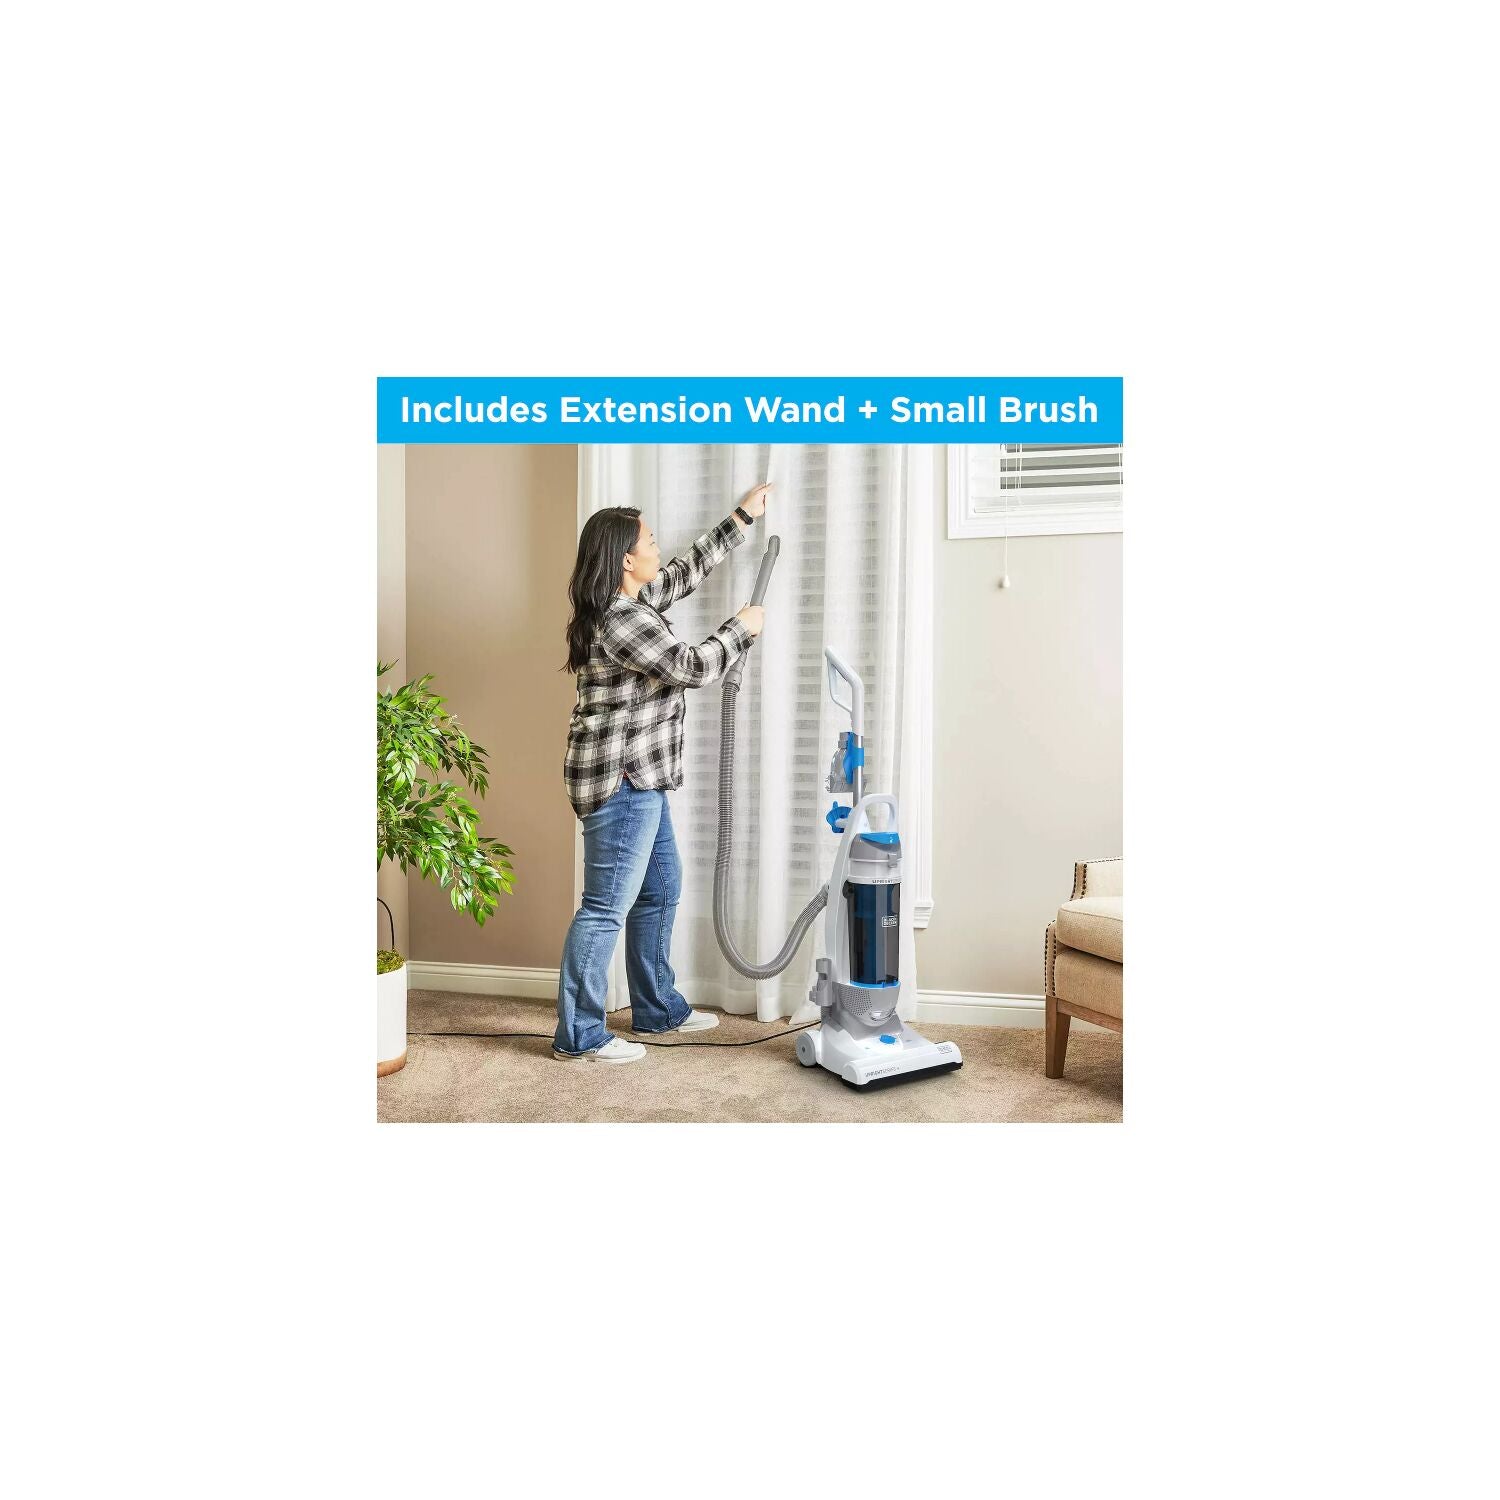 Black + Decker UprightSeries+ Vacuum Multi Surface with Pet Attachment Bdur2, White